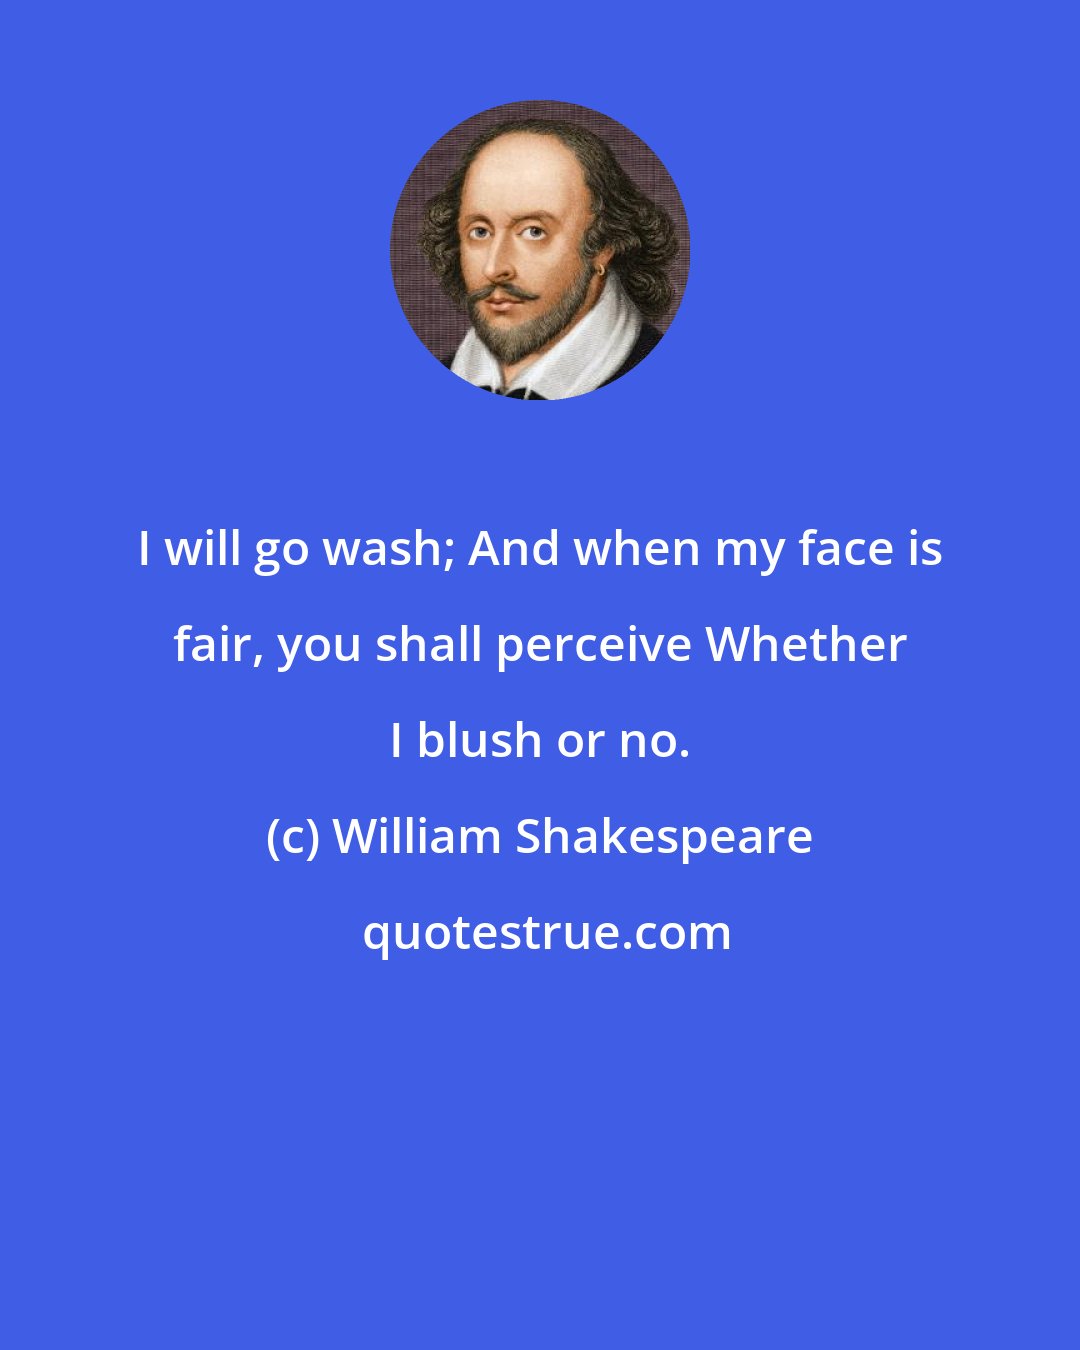 William Shakespeare: I will go wash; And when my face is fair, you shall perceive Whether I blush or no.